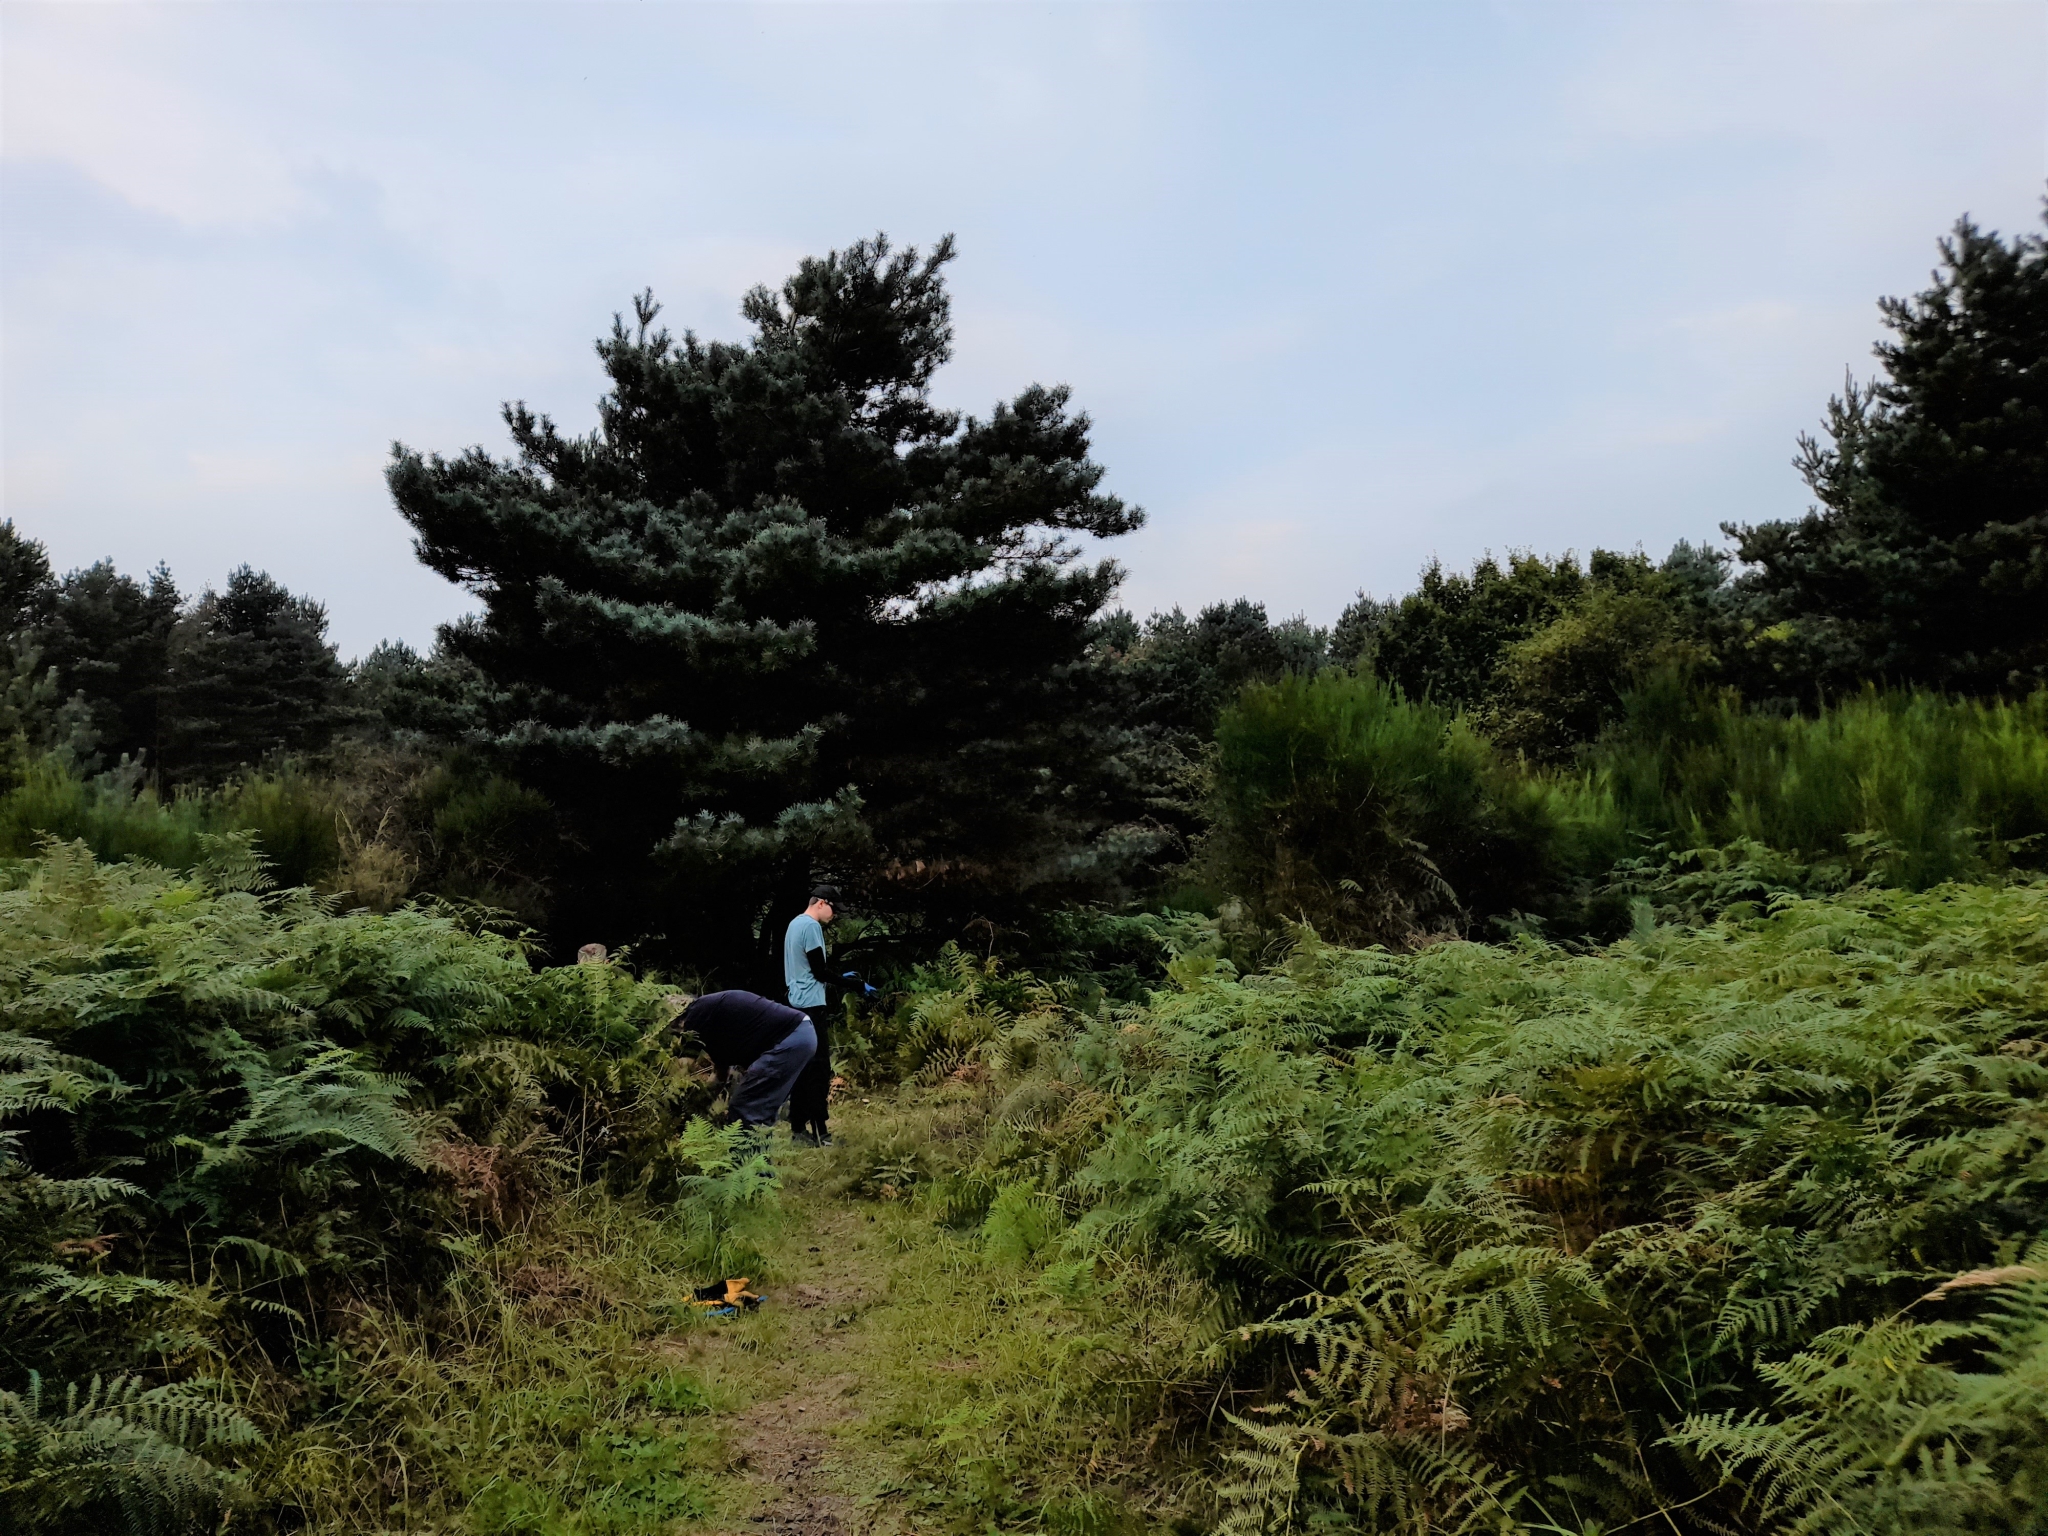 A photo from the FoTF Conservation Event - September 2021 - Brash Clearance at the Goshwak Trail : Volunteers work to clear Bracken on the Goshawk Trail